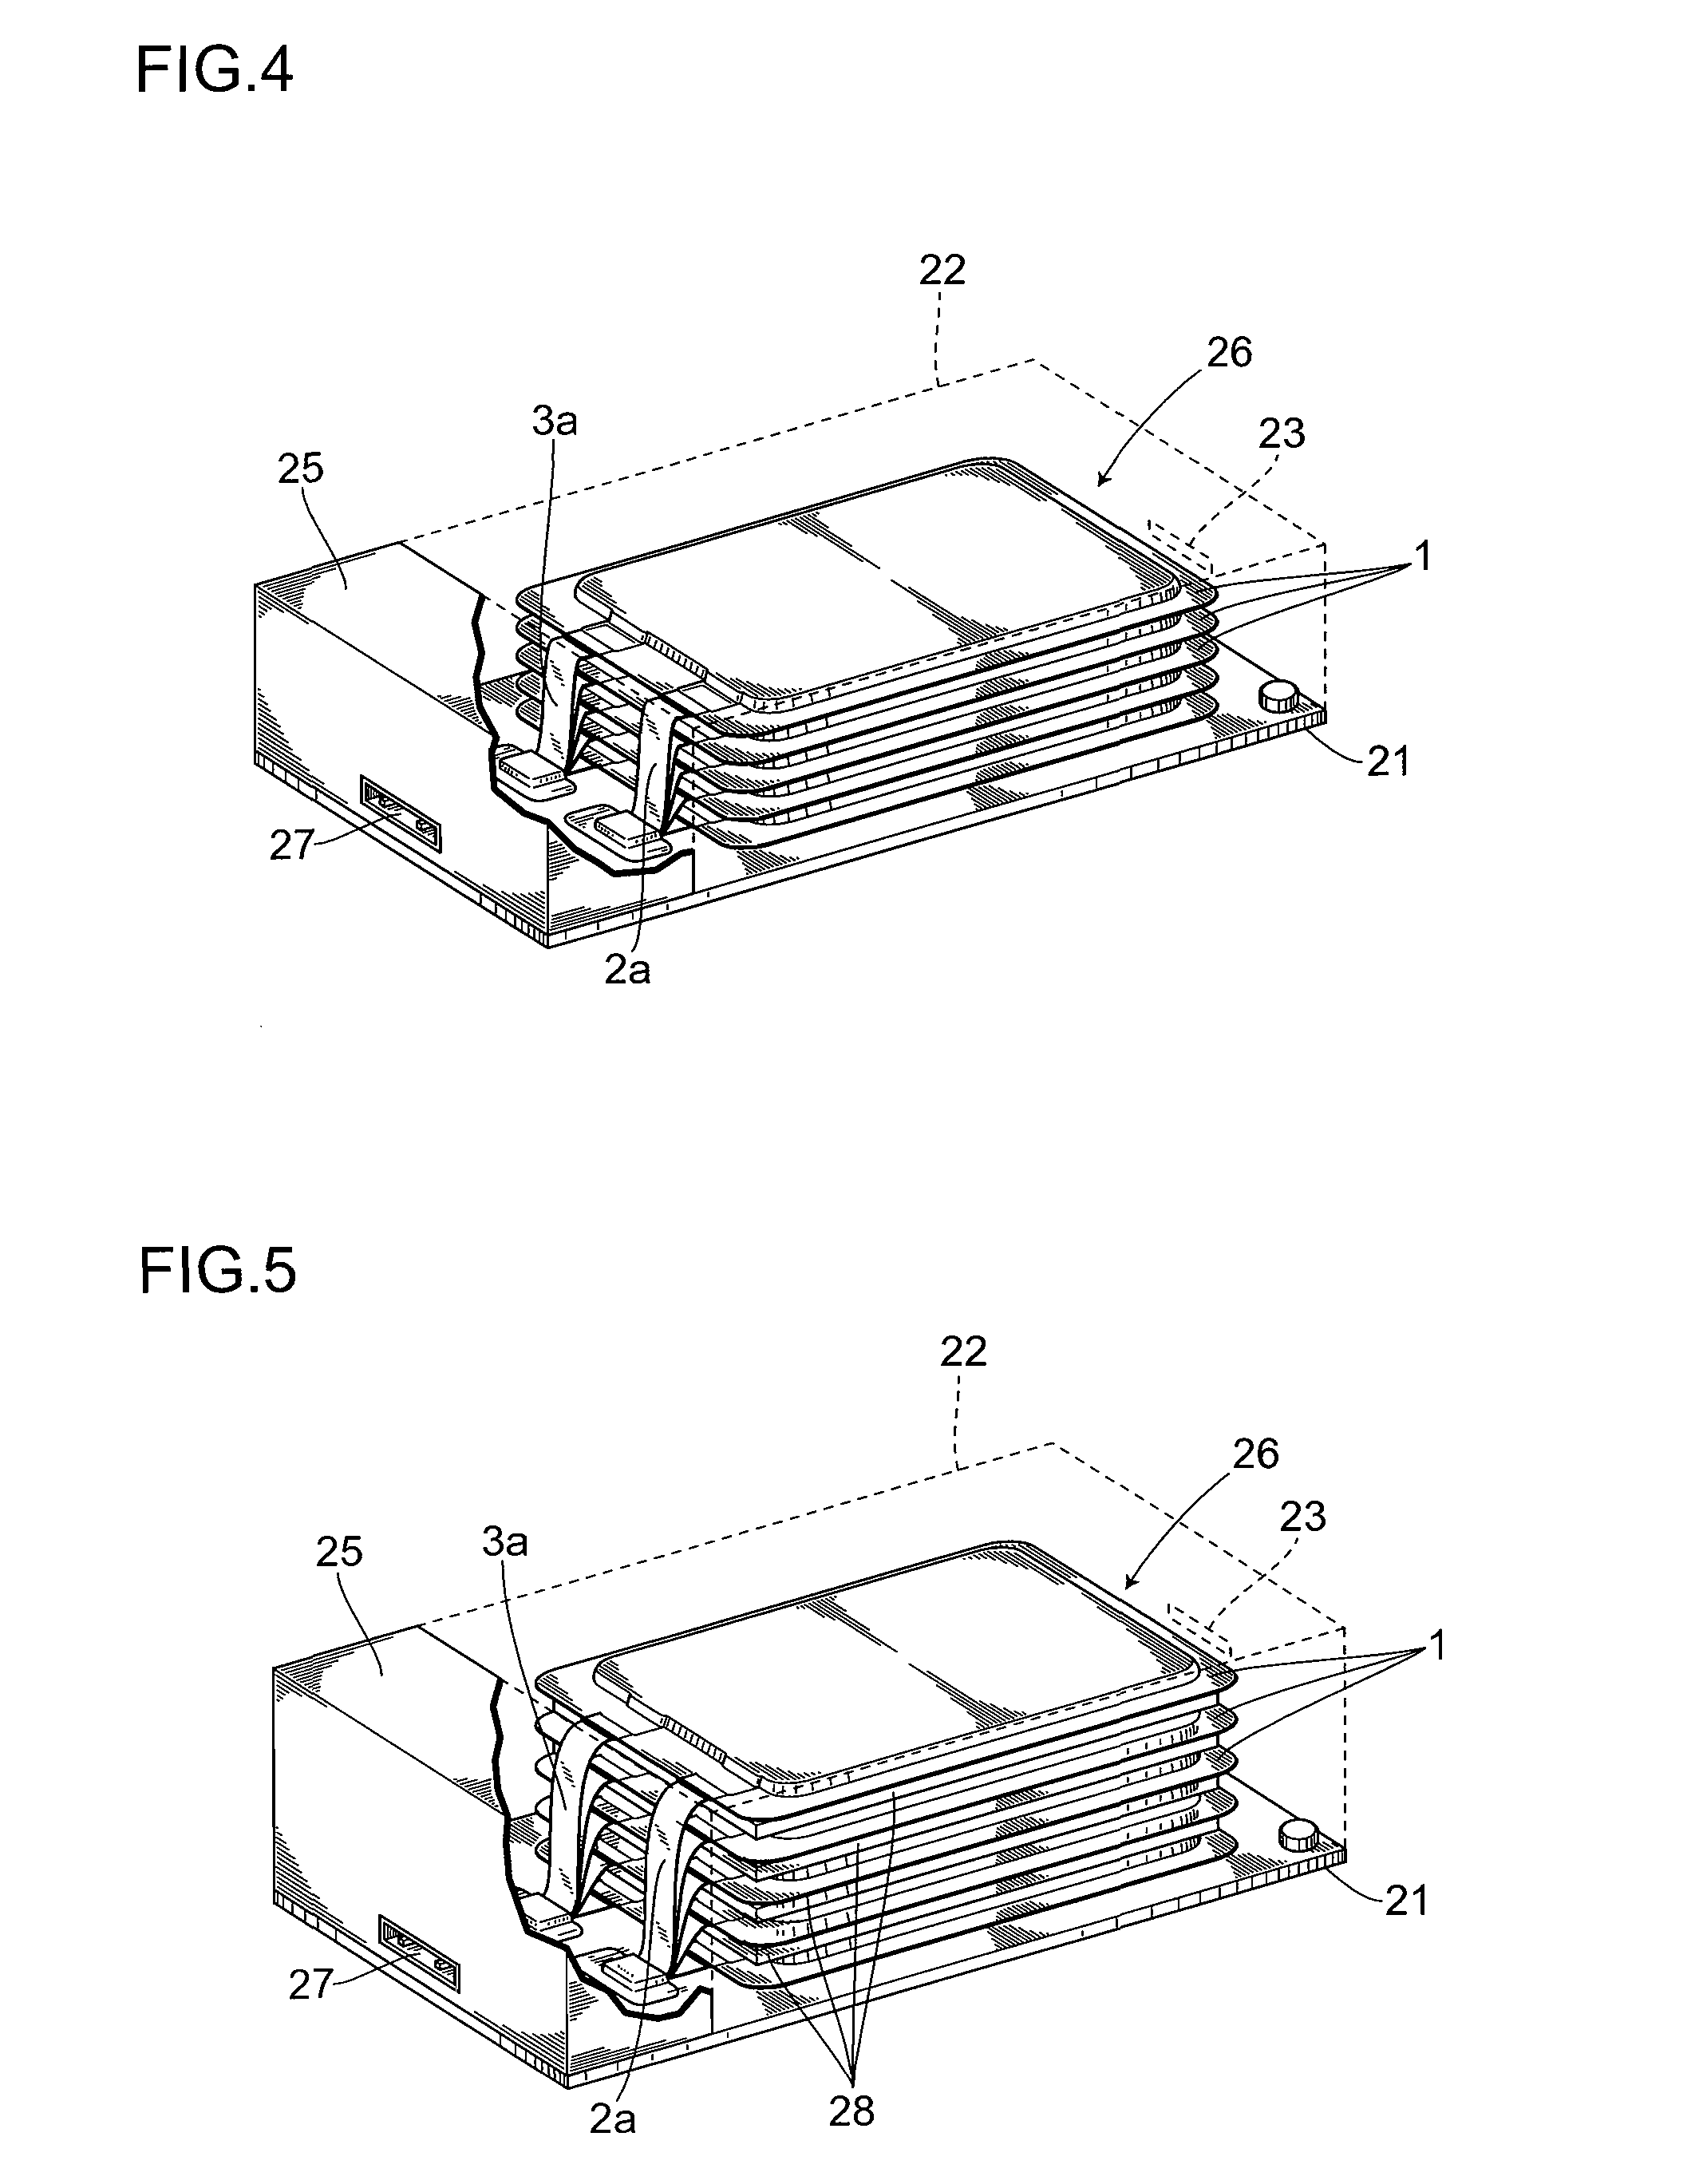 Method and device for safety protection of secondary battery